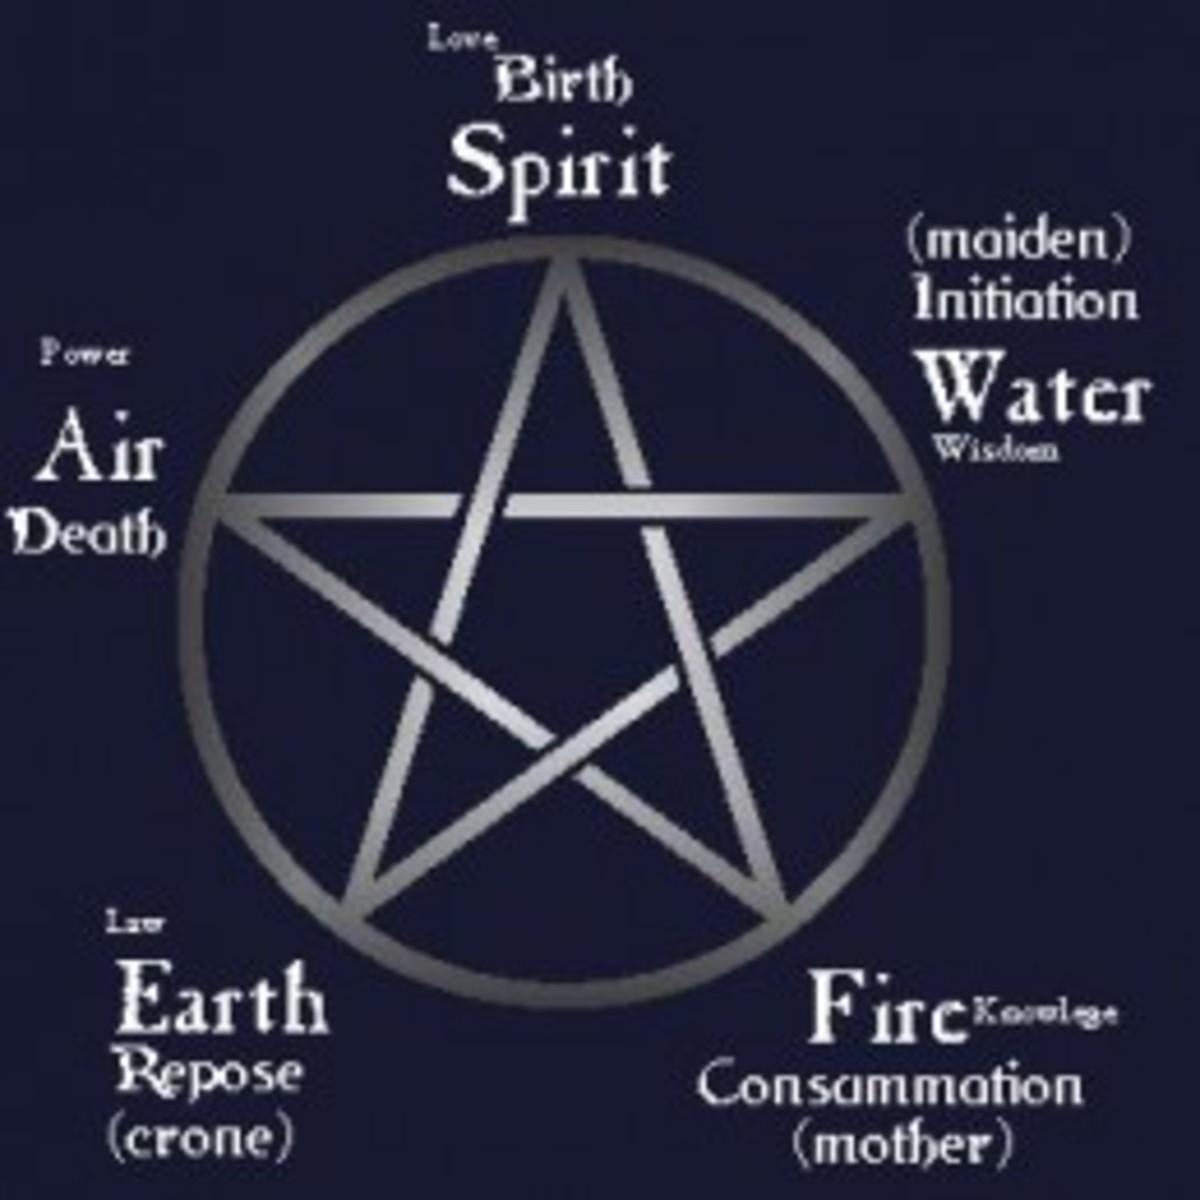 witchcraft-part-2-types-of-witches-terminology-decoded-symbols-and-more